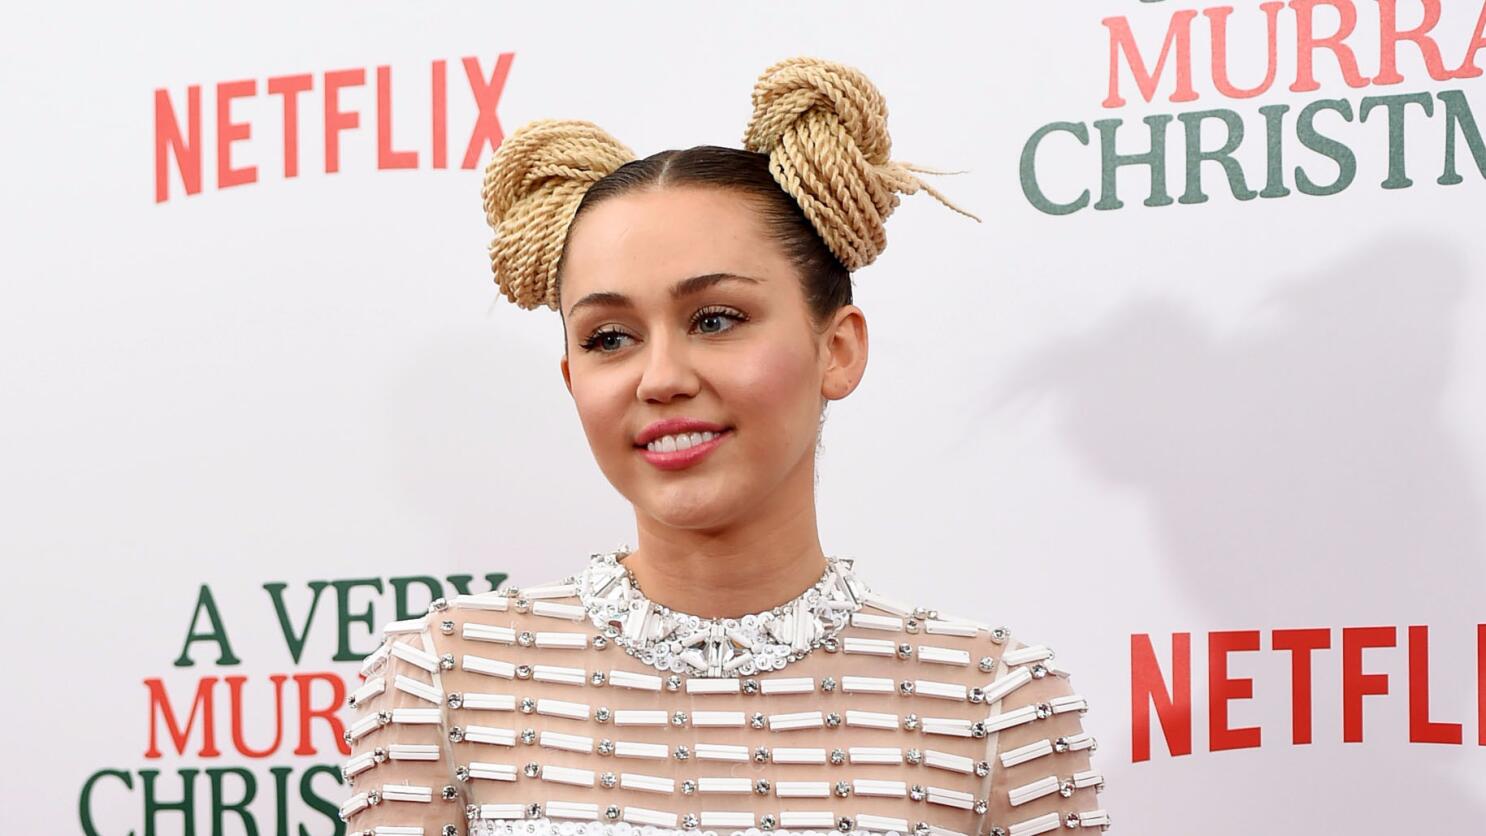 Miley Cyrus Says She's Gender Fluid: 'It Has Nothing To Do With